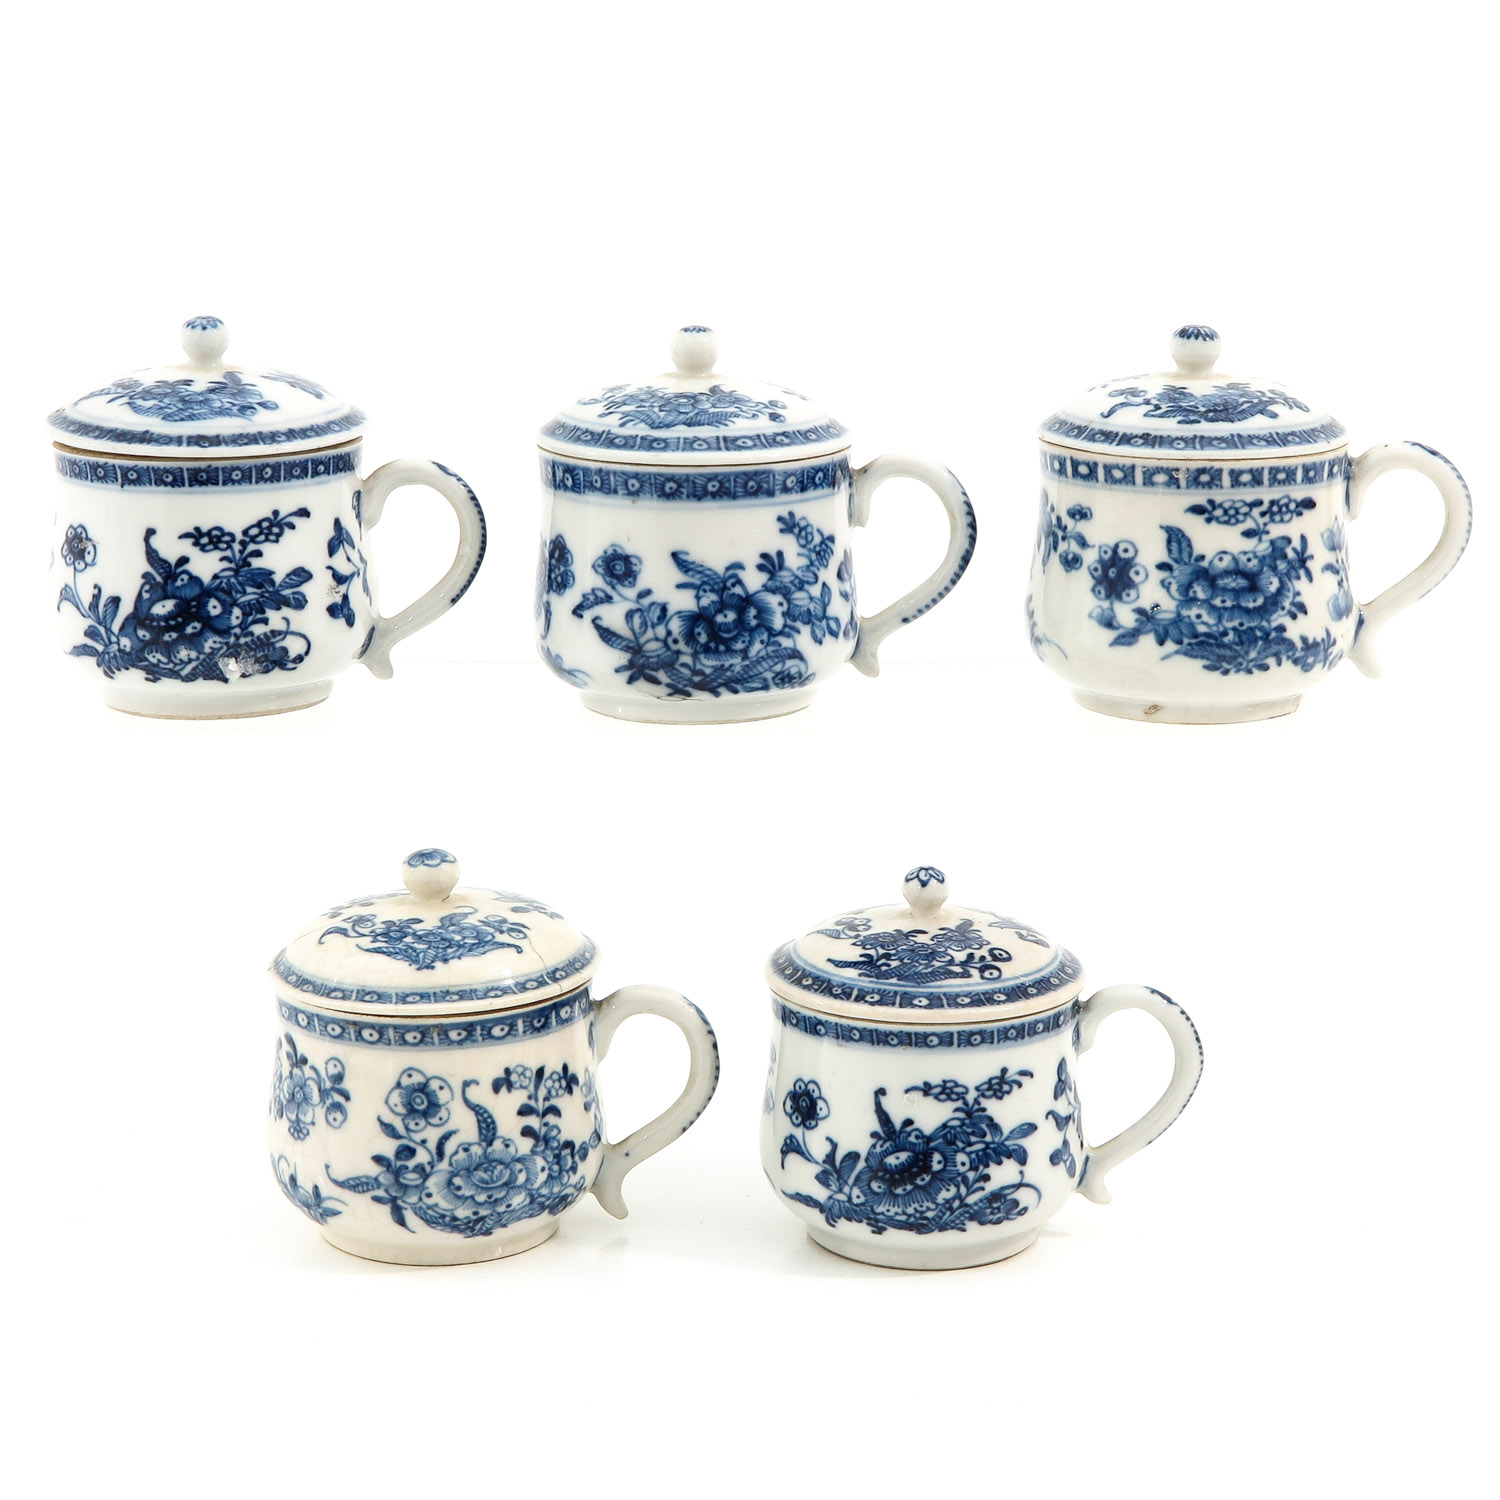 A Set of 5 Covered Cups